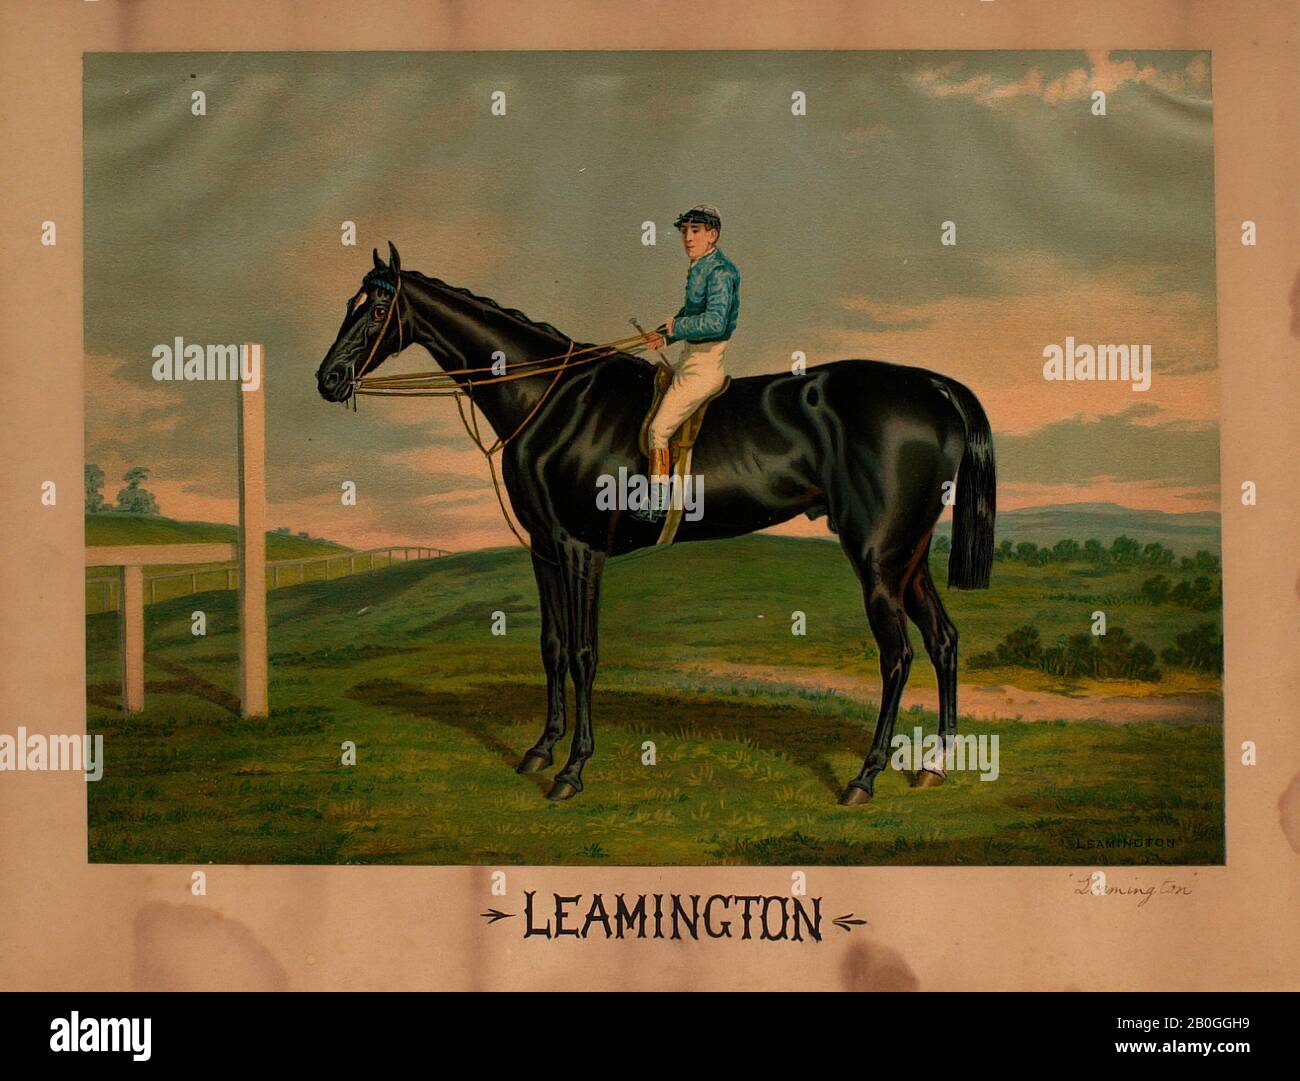 After Henry Stull, American, 1851–1913, 'Leamington', 1881, Chromolithograph on paper, Overall: 10 5/8 x 14 7/8 in. (27 x 37.8 cm Stock Photo